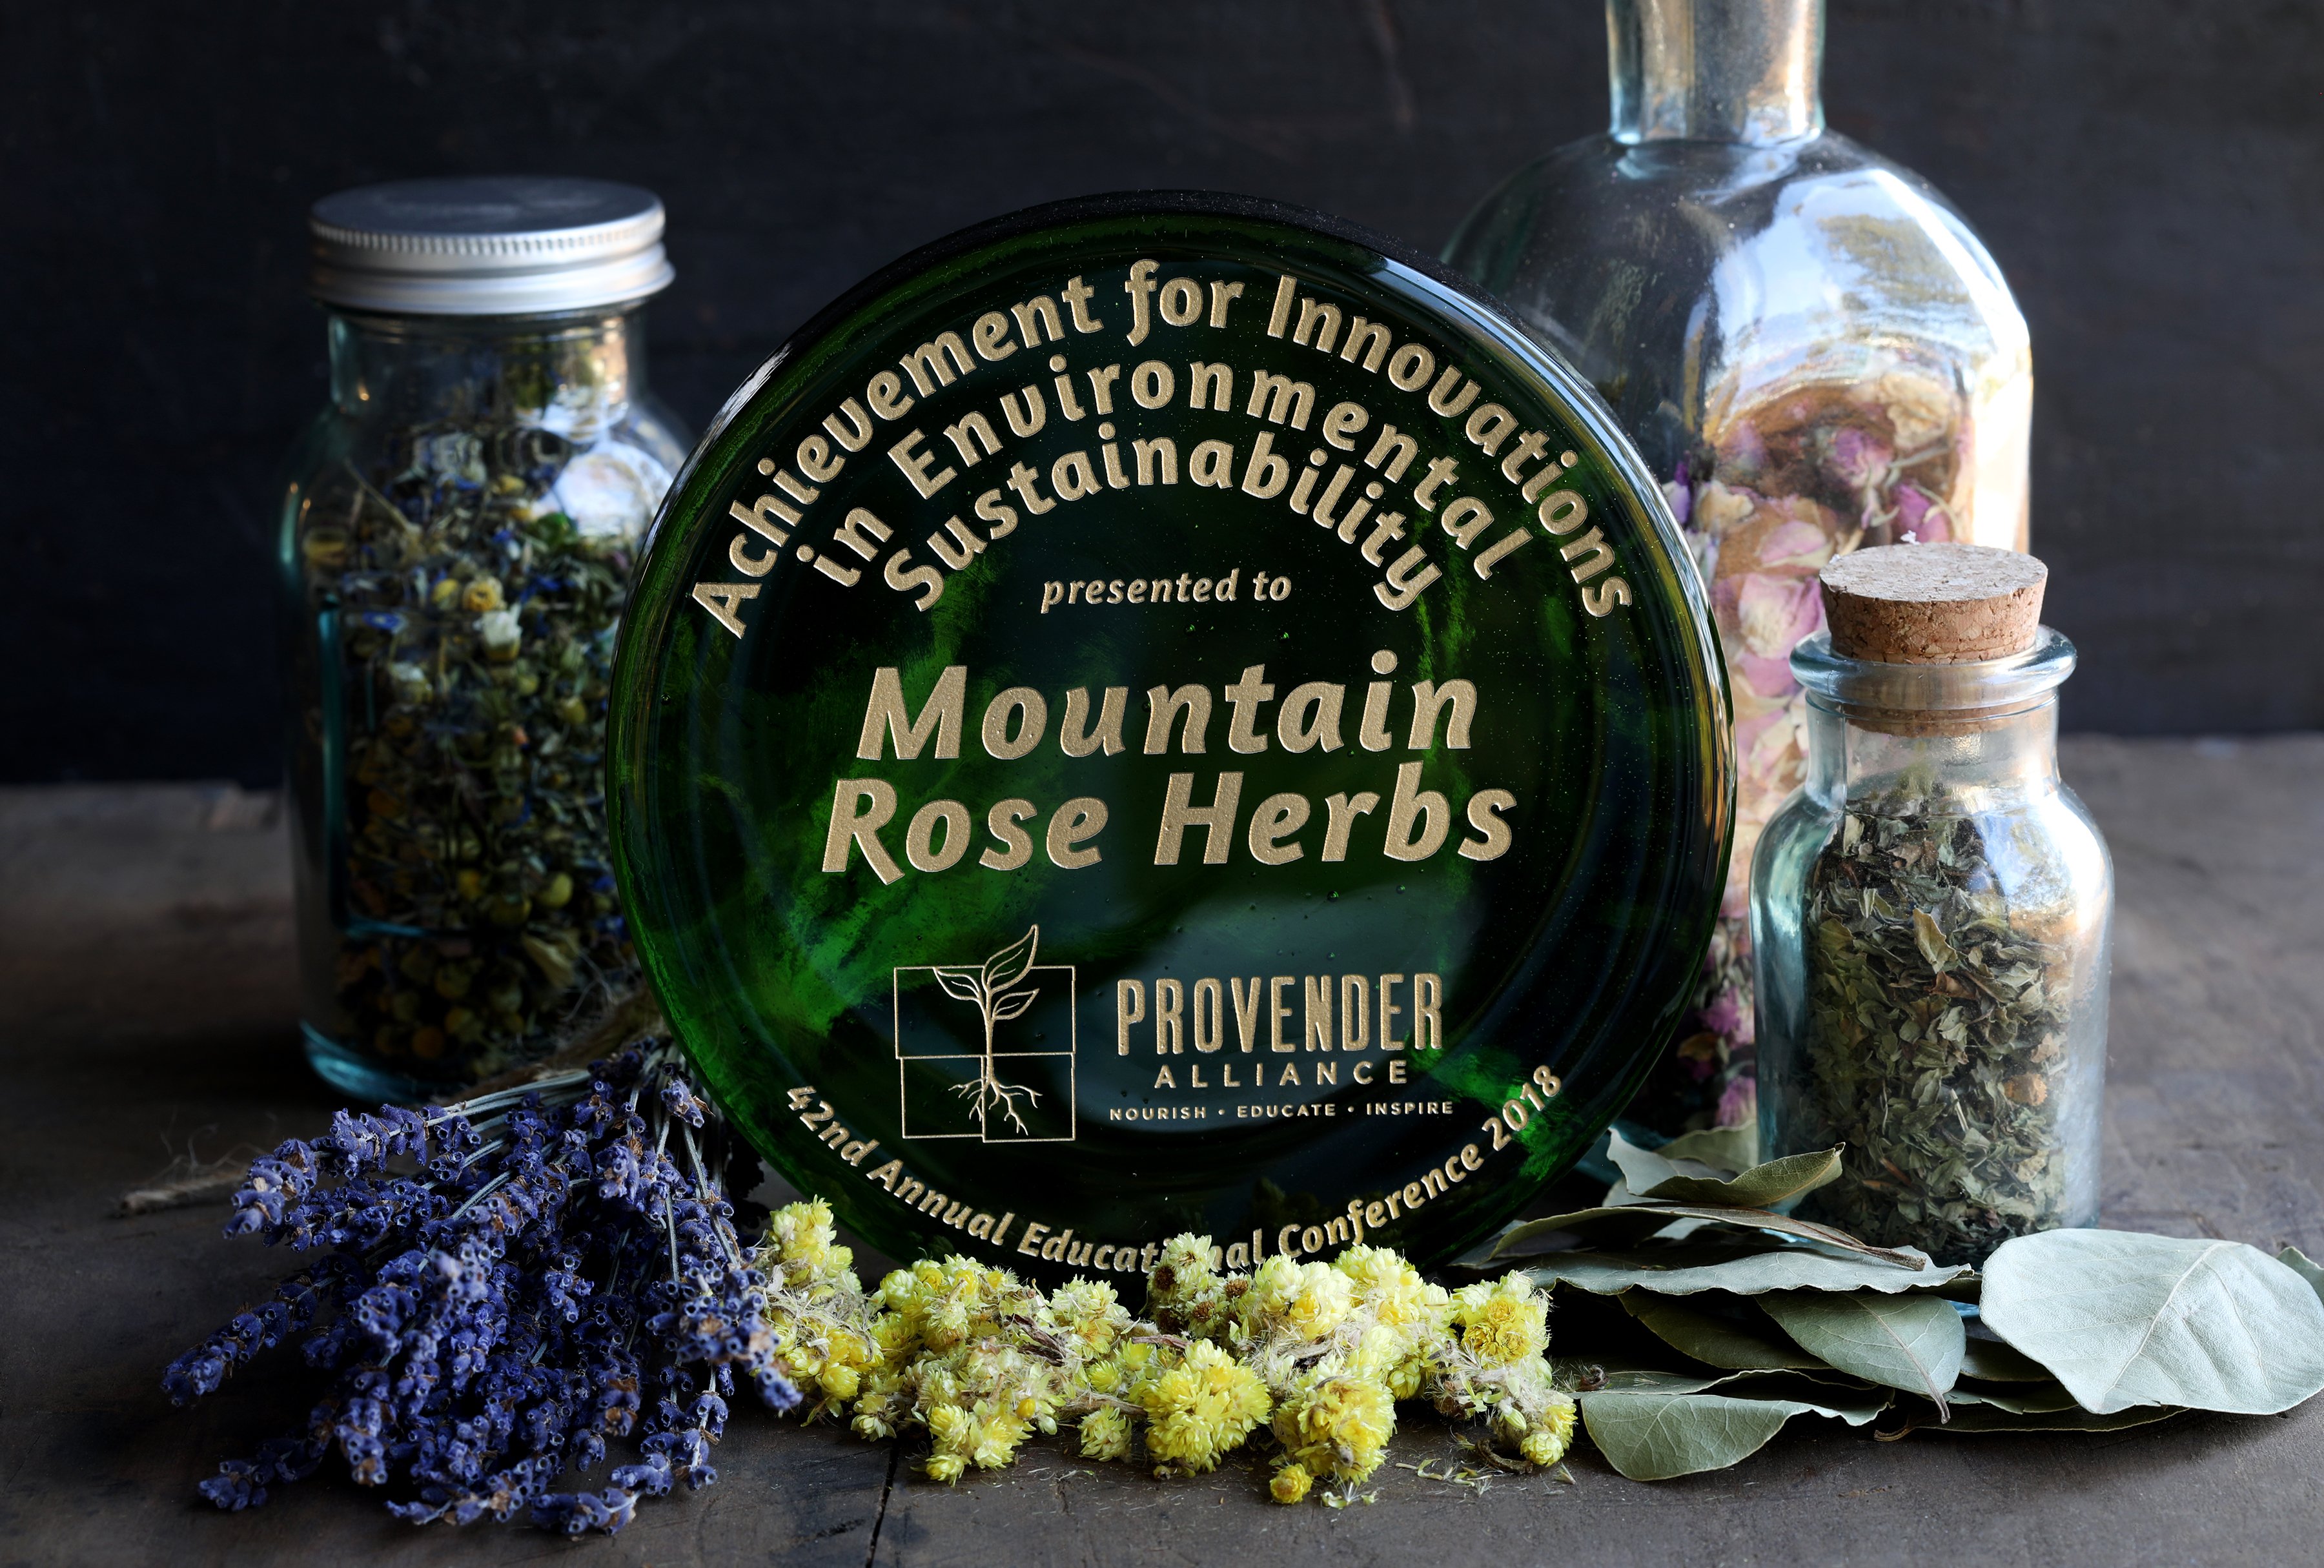 Mountain Rose Herbs has earned many awards for environmental stewardship, sustainability in the workplace, and zero waste practices, plus many more. 